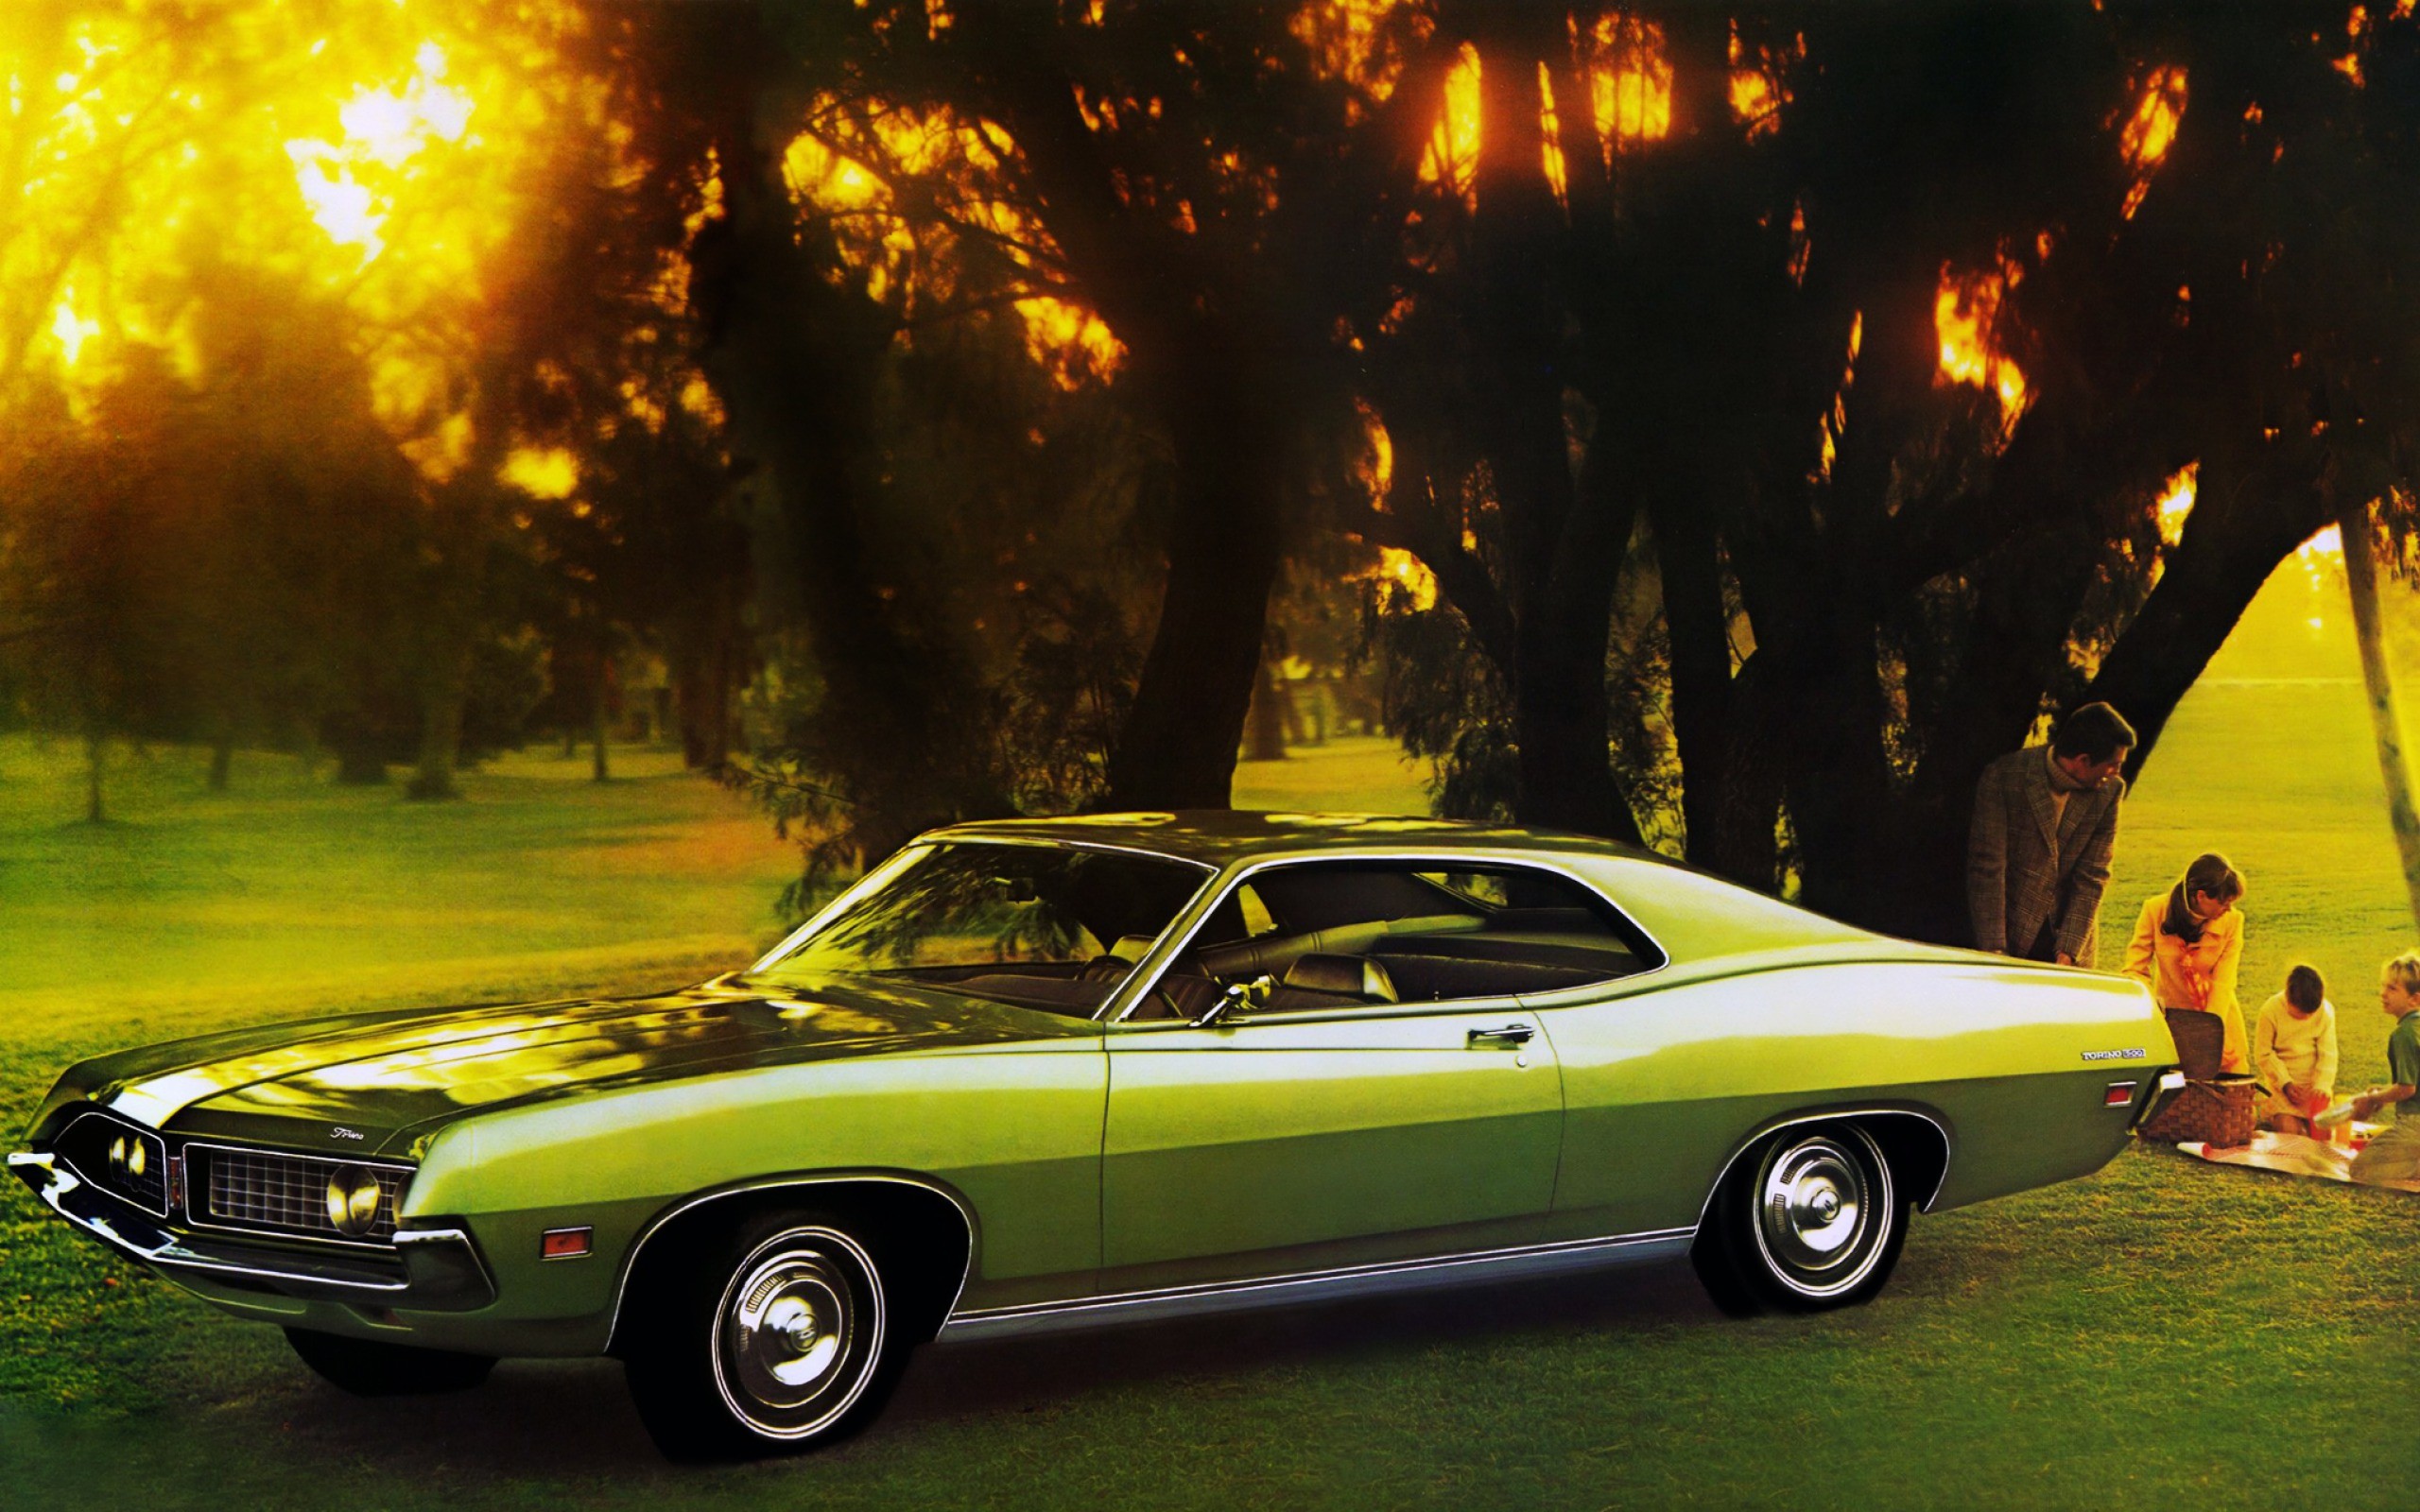 Vehicles 1971 Ford Torino 500 HD Wallpaper | Background Image